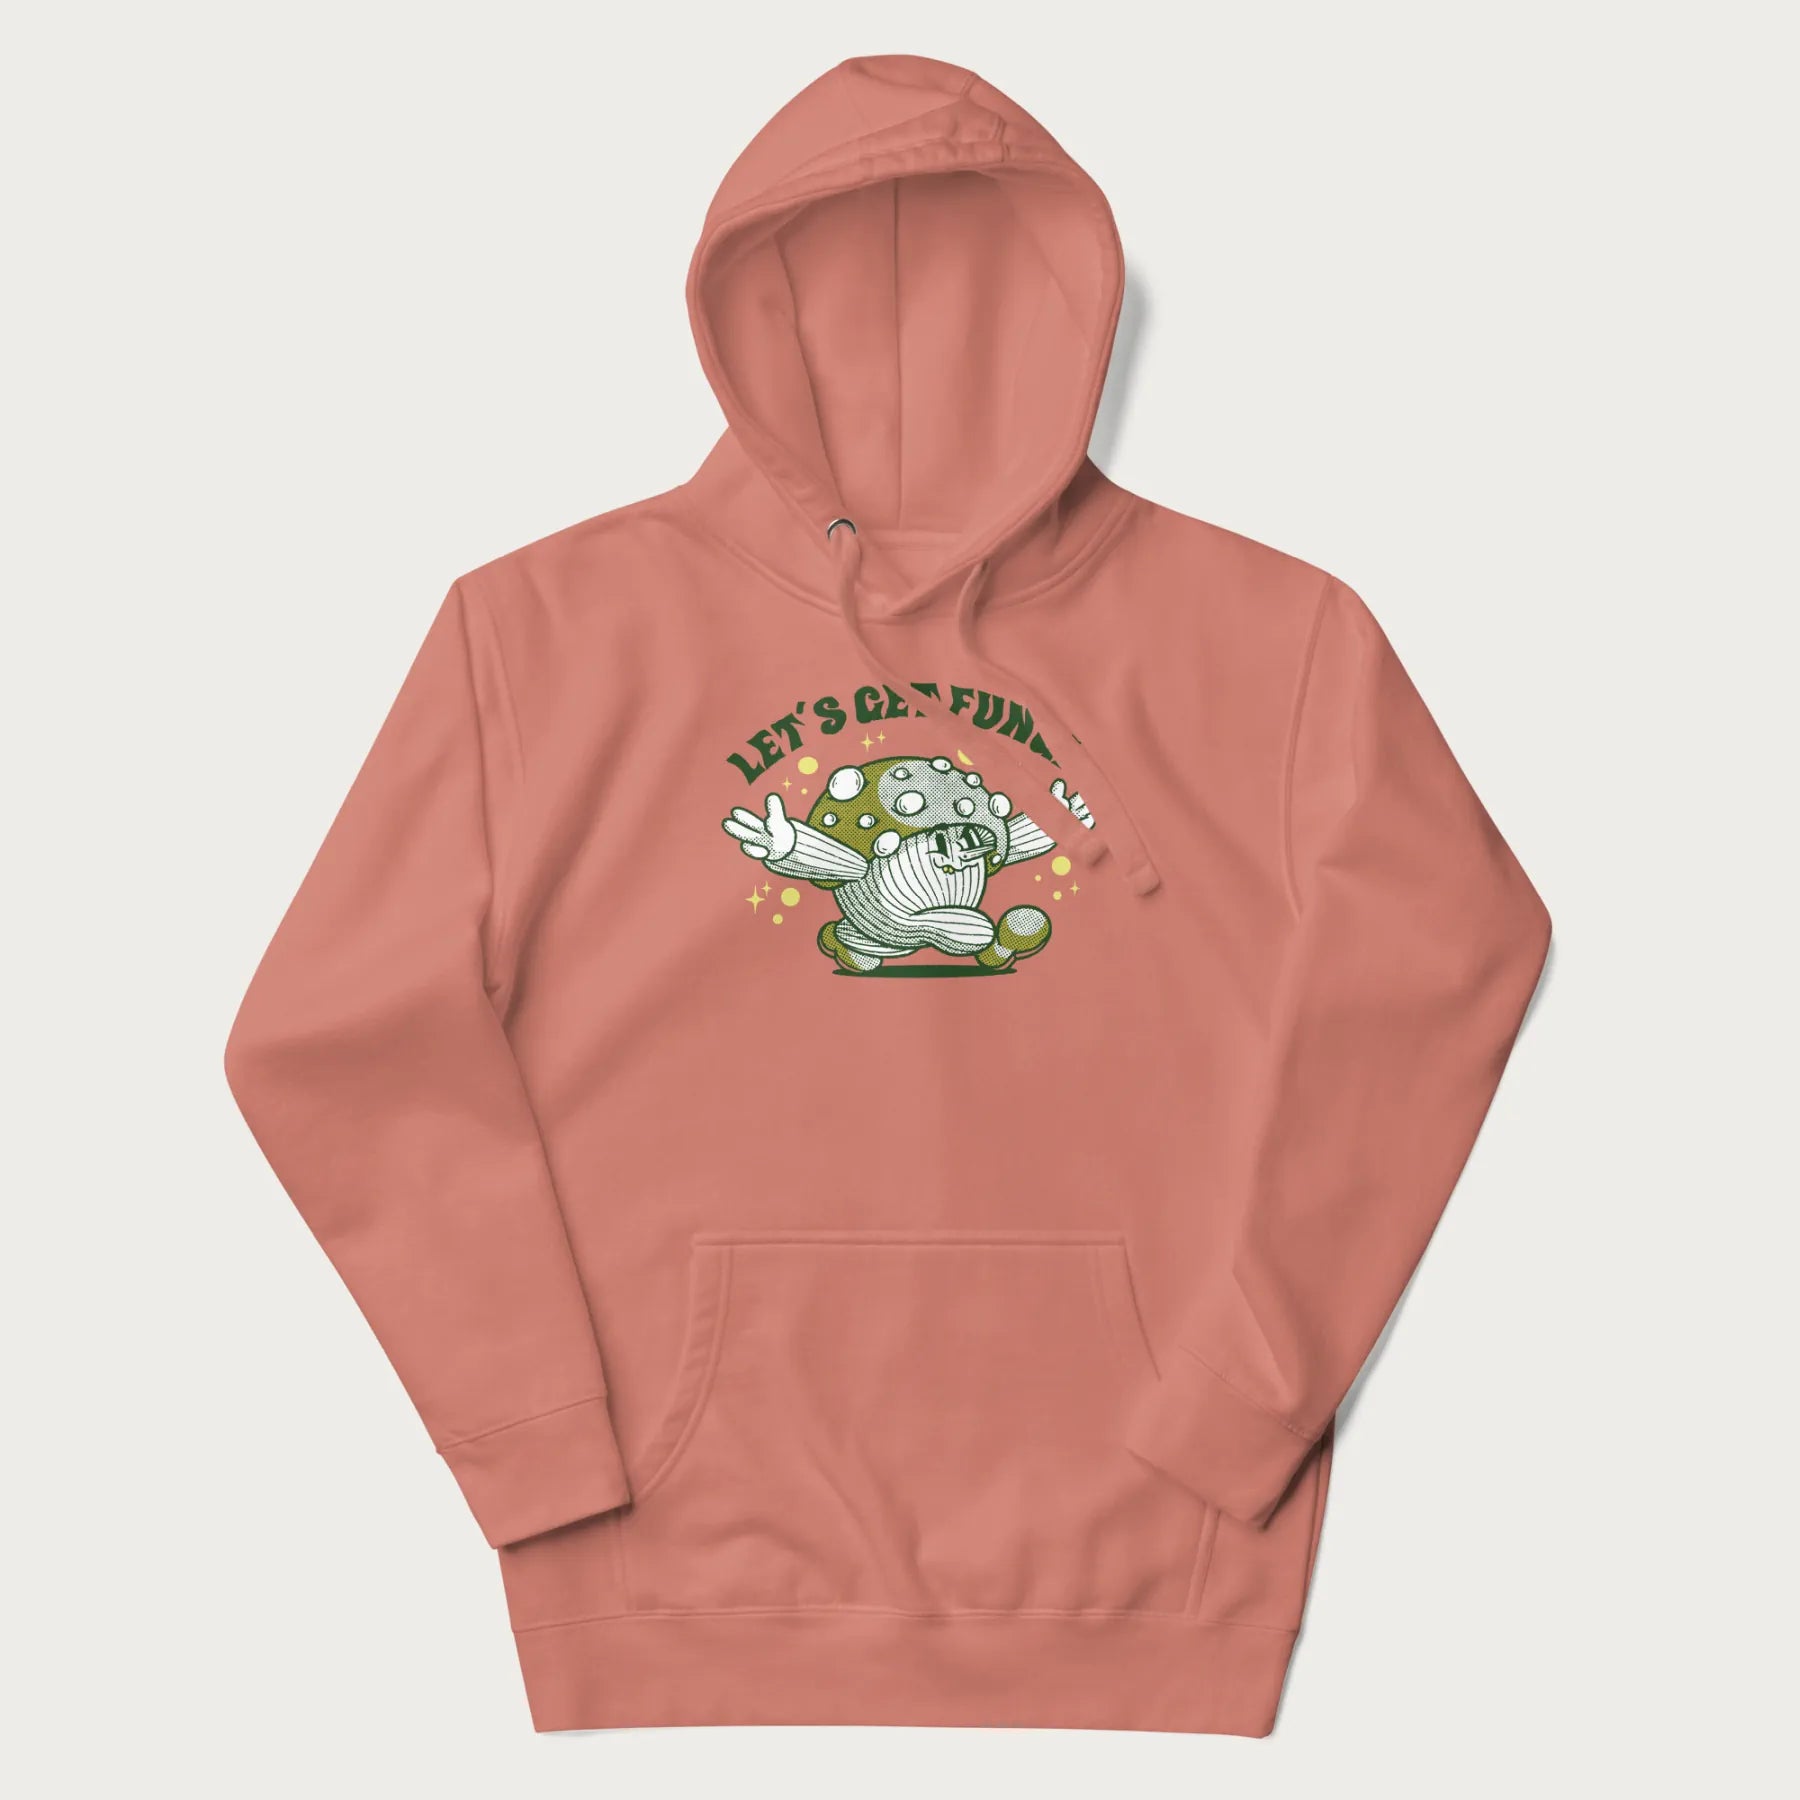 Light pink hoodie with a retro-inspired graphic of a mushroom mascot character and the text 'Let's Get Fungi'.